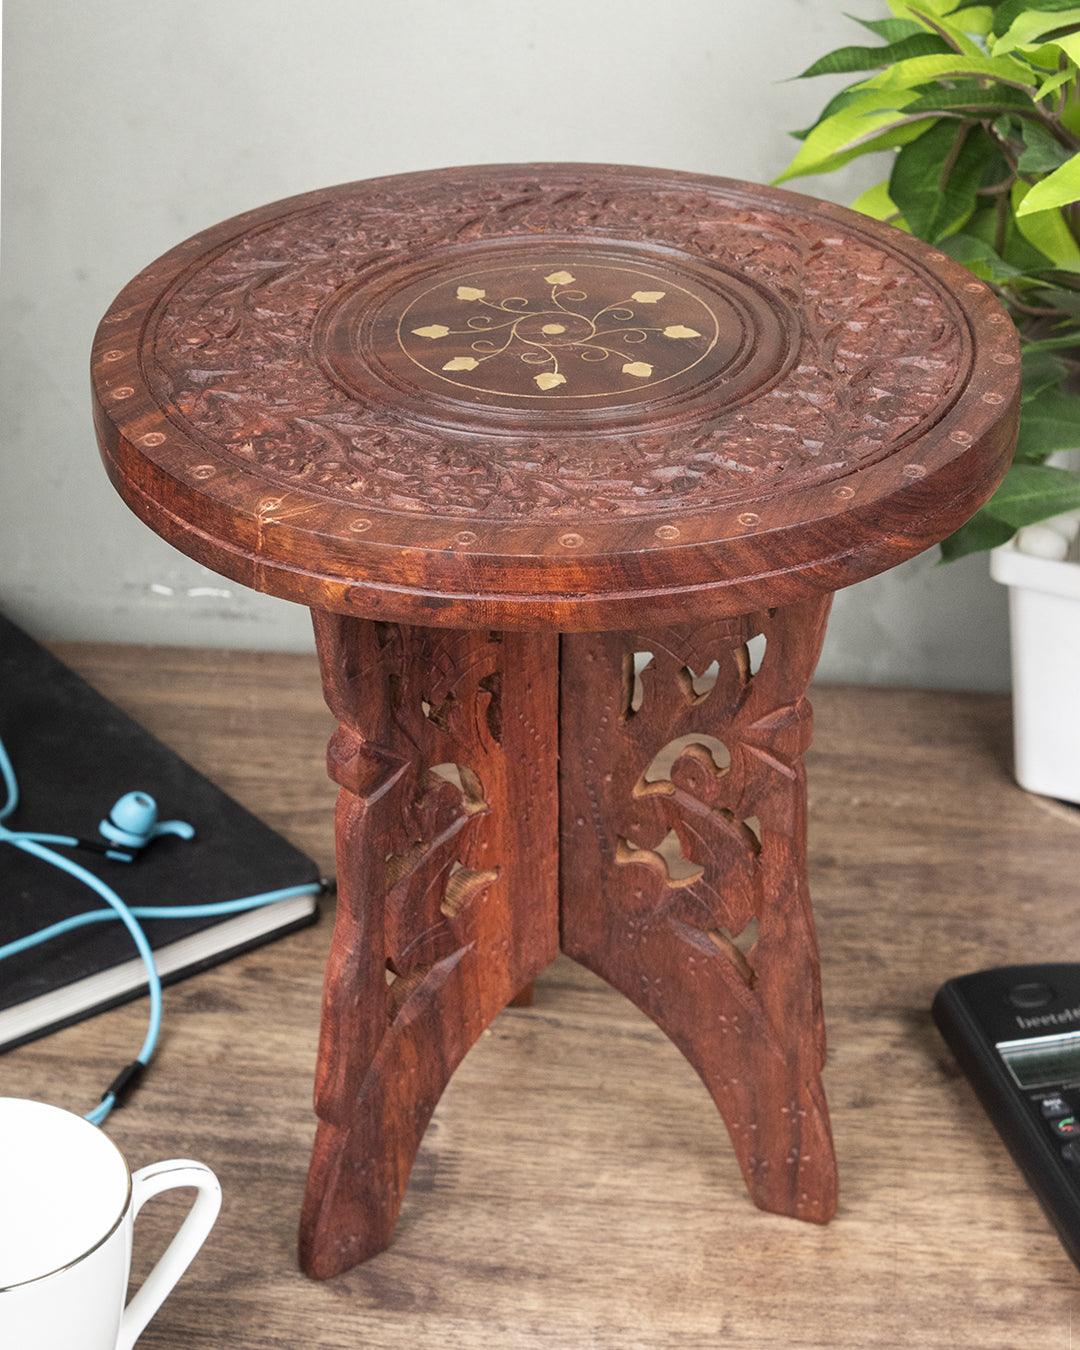 'WOOD CARVING' Handcrafts Small Coffee Table in Sheesham Wood - MARKET 99